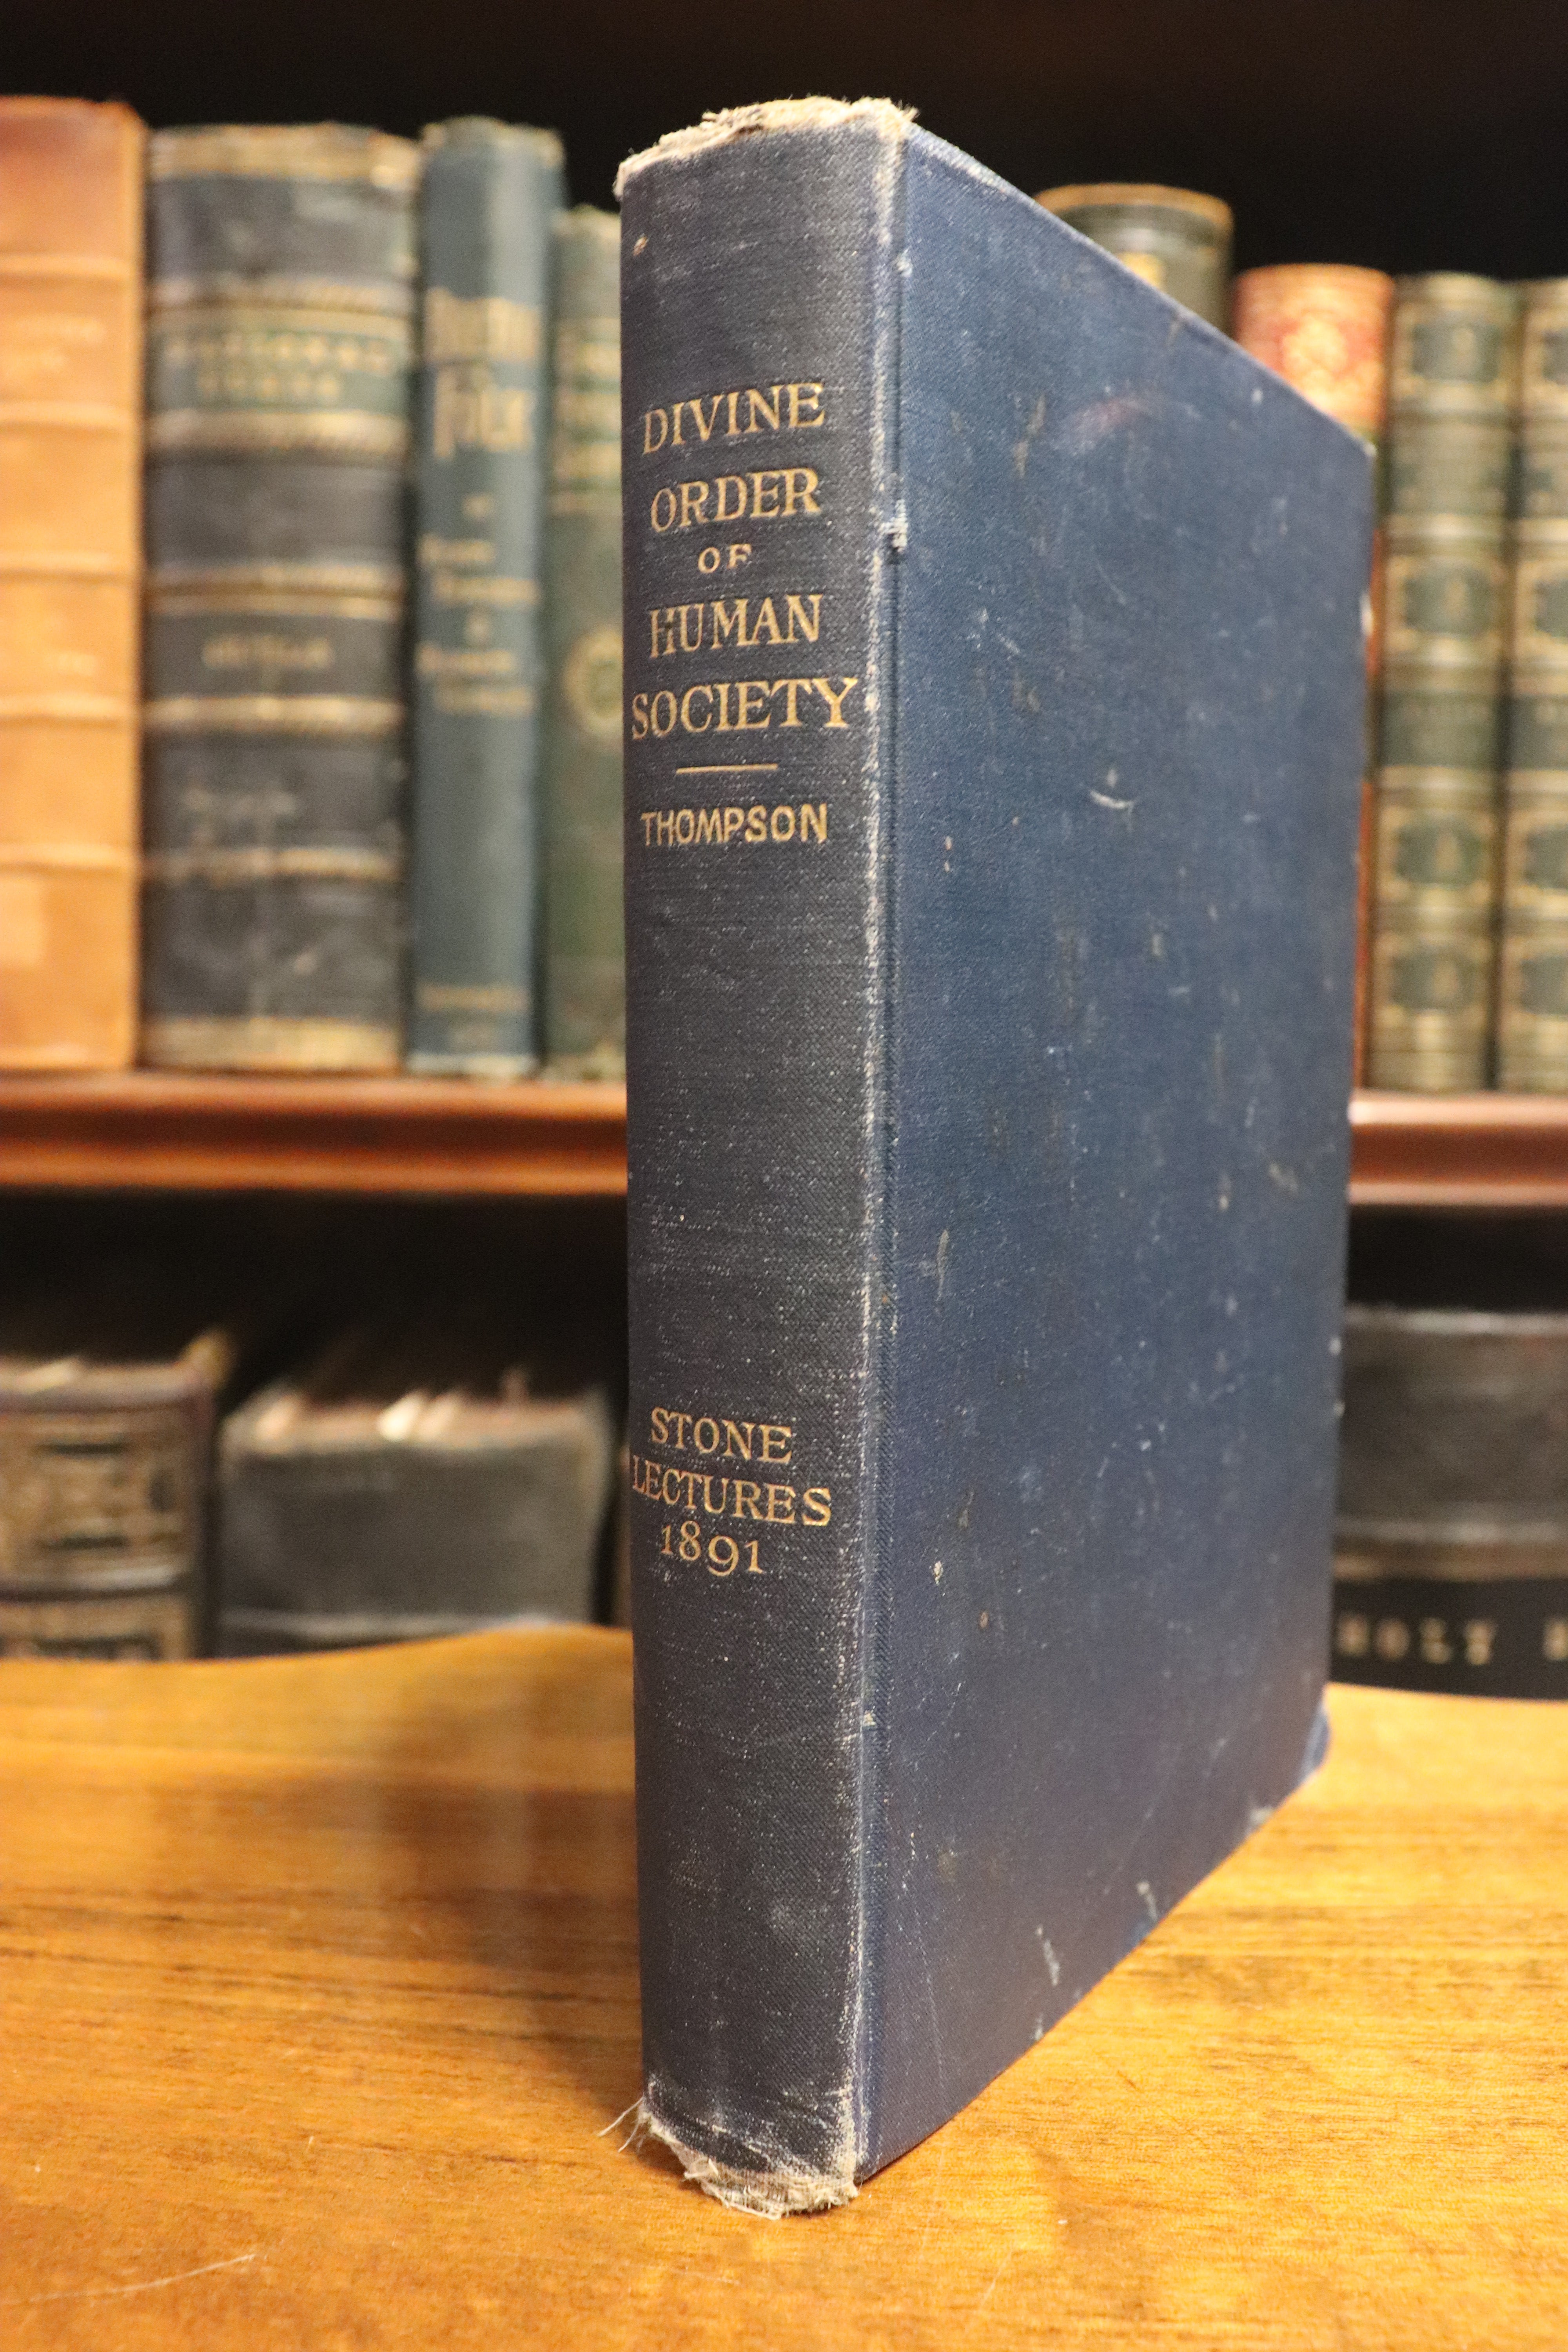 The Divine Order Of Human Society - 1891 - Antique Theology Book